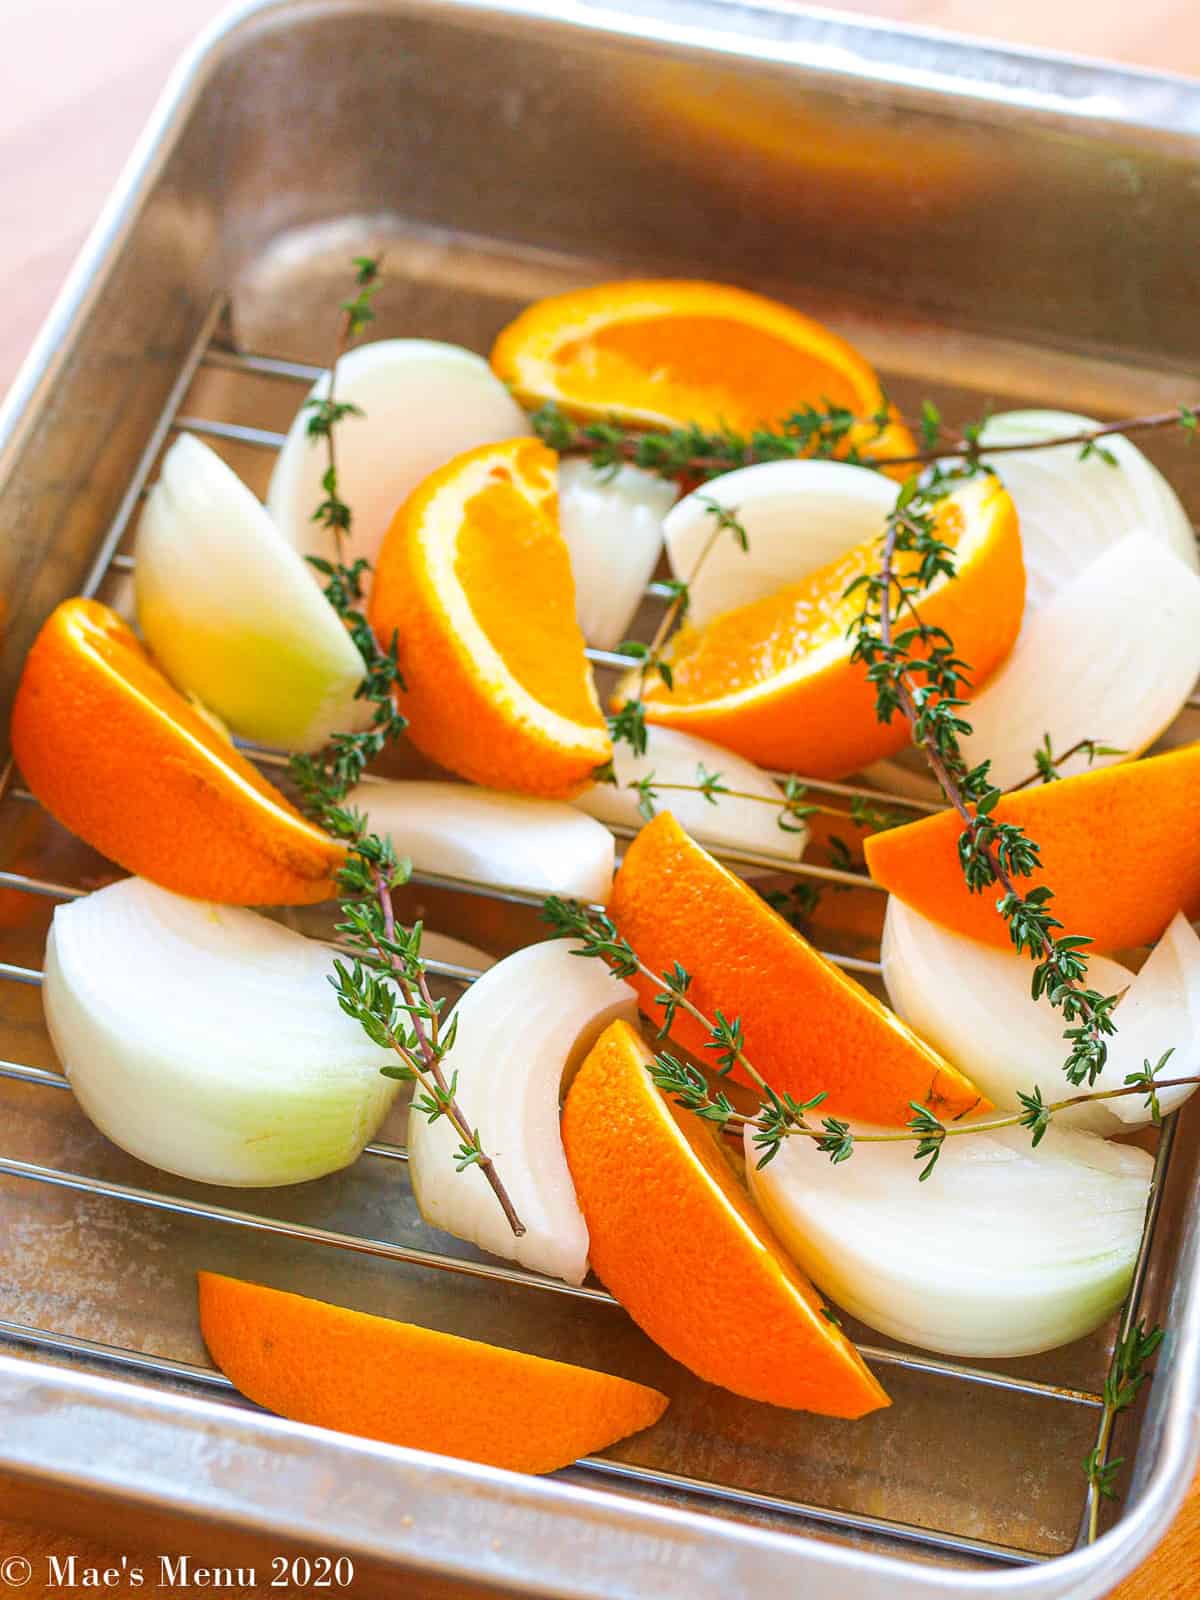 Orange wedges and onions on a roasting rack in a baking pan